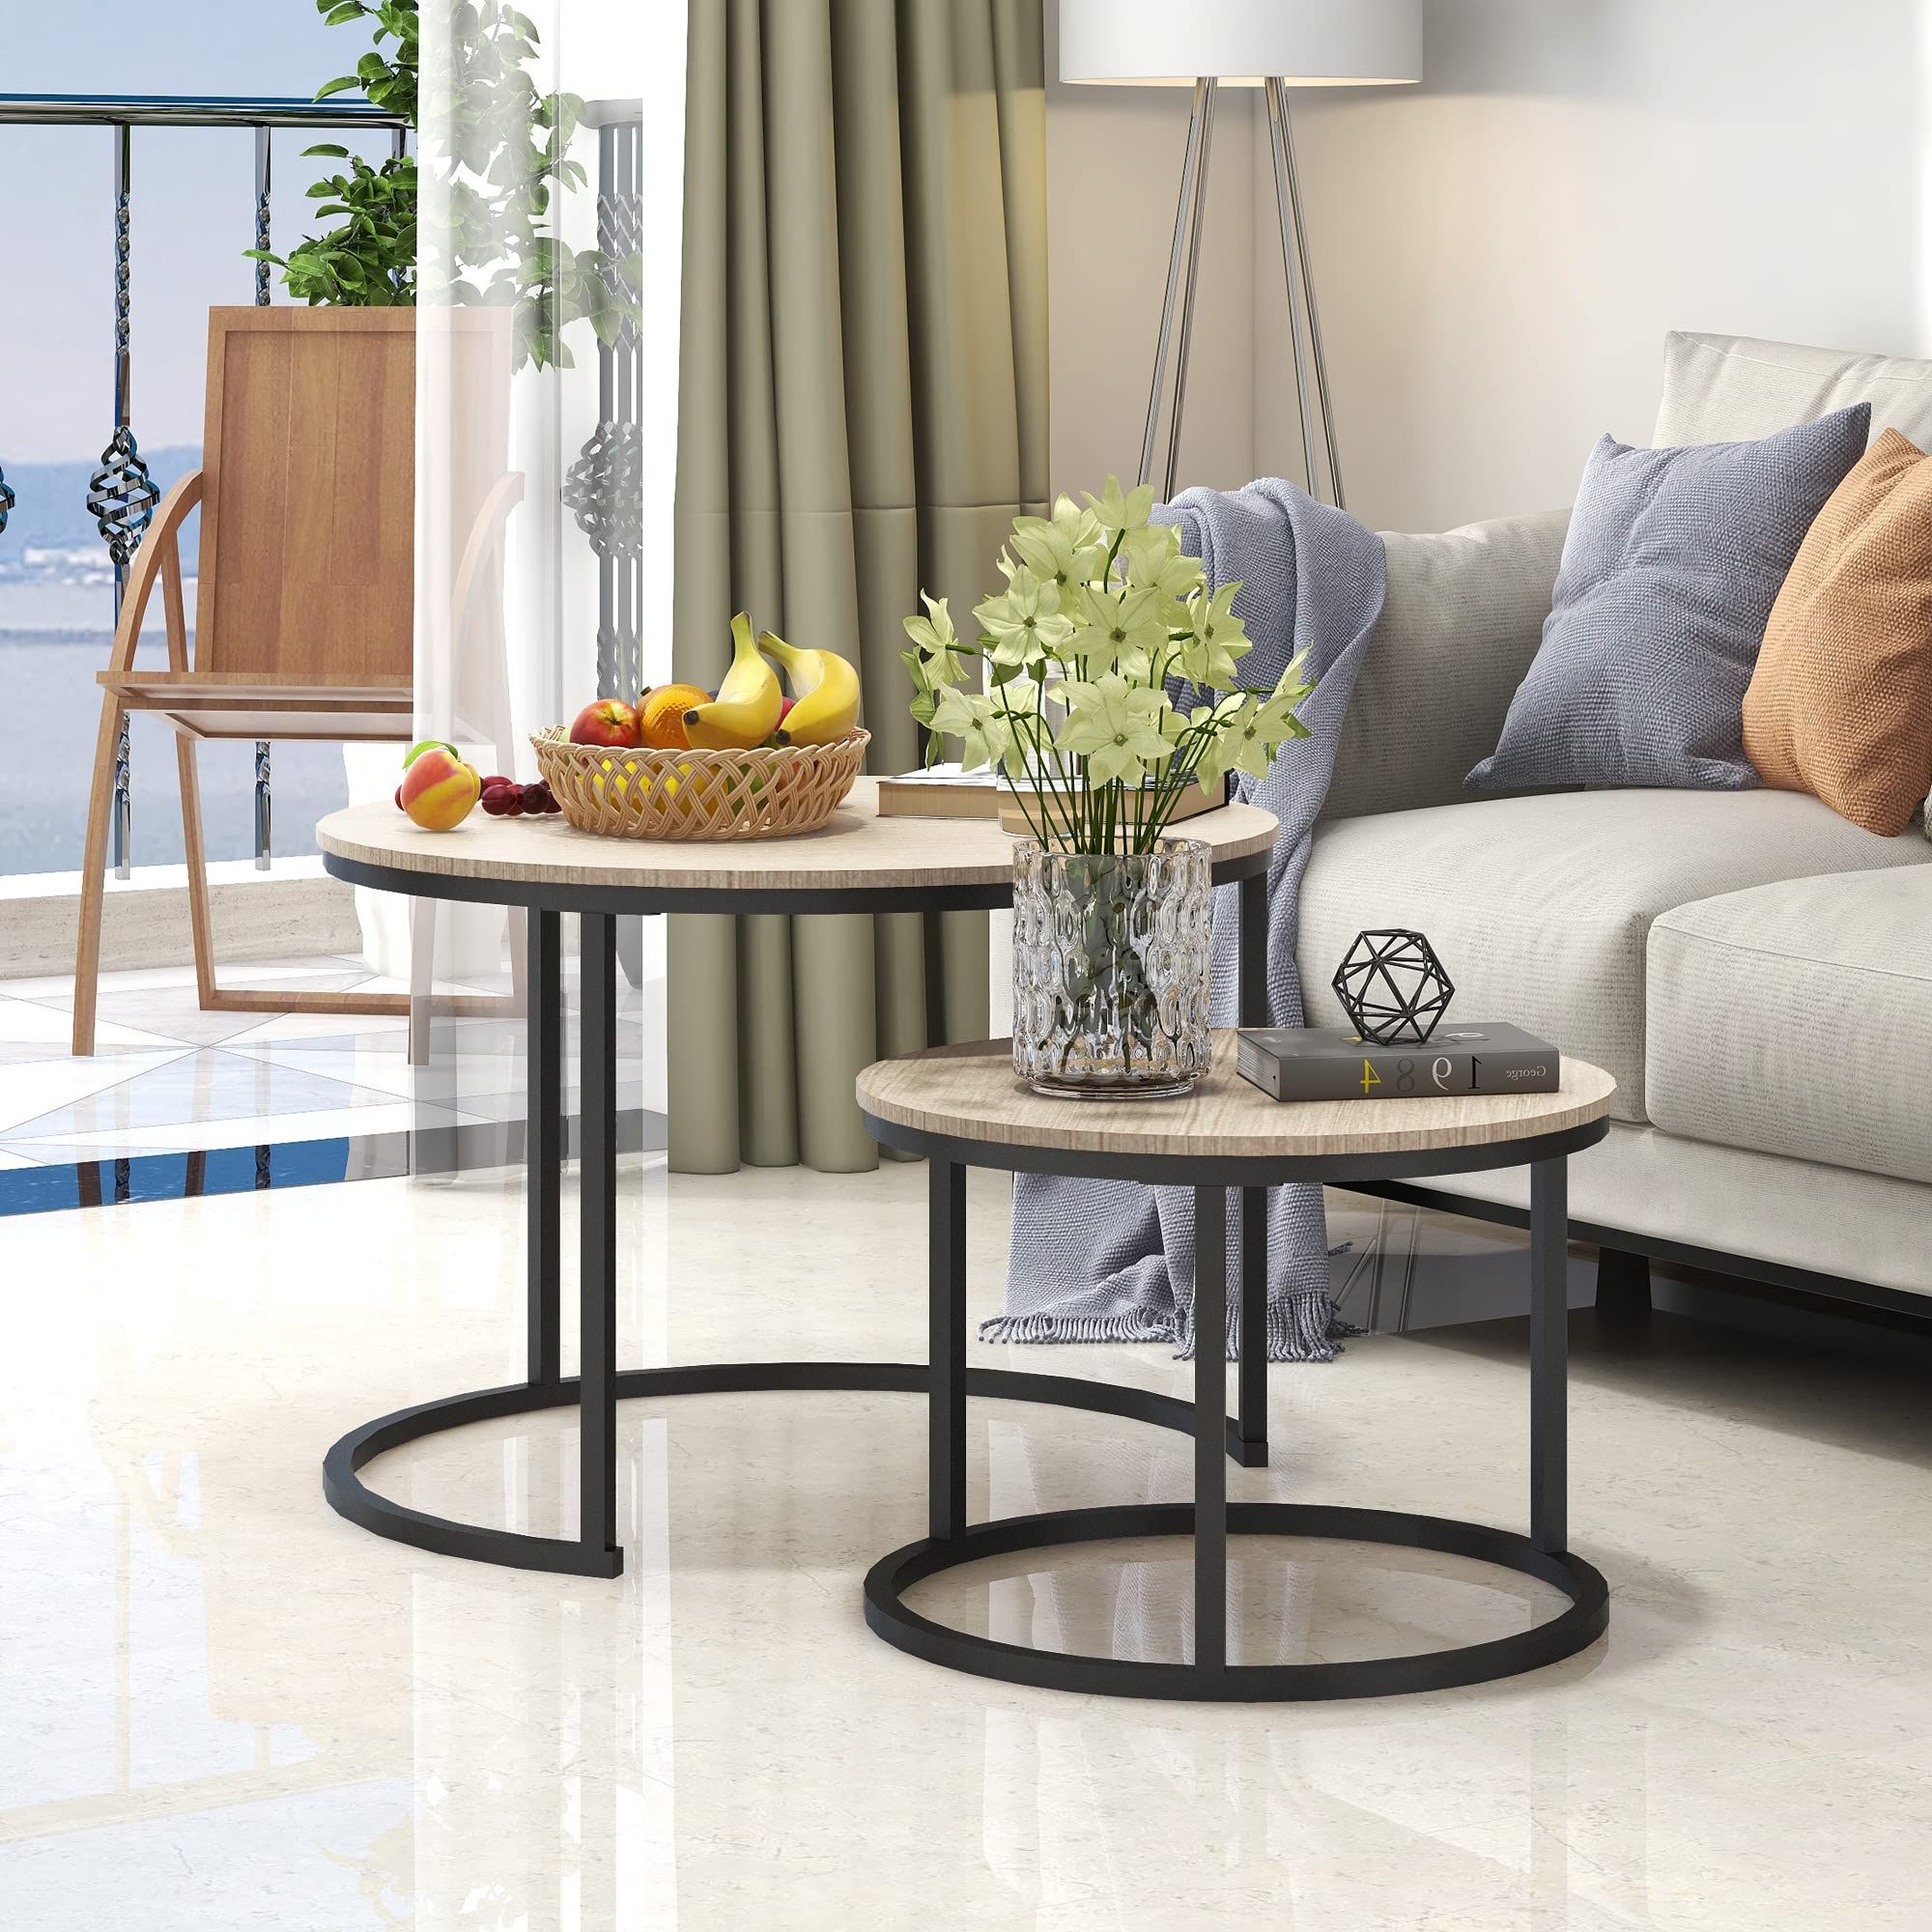 Fashionable Bofeng Round Coffee Tables Set Of 2 Stacking End Side Tables With Sturdy Steel  Metal Frame, Living Room Tables,sofa Tea Table For Small Space,natural Oak  : Amazon.co.uk: Home & Kitchen With Regard To Round Coffee Tables With Steel Frames (Photo 4 of 10)